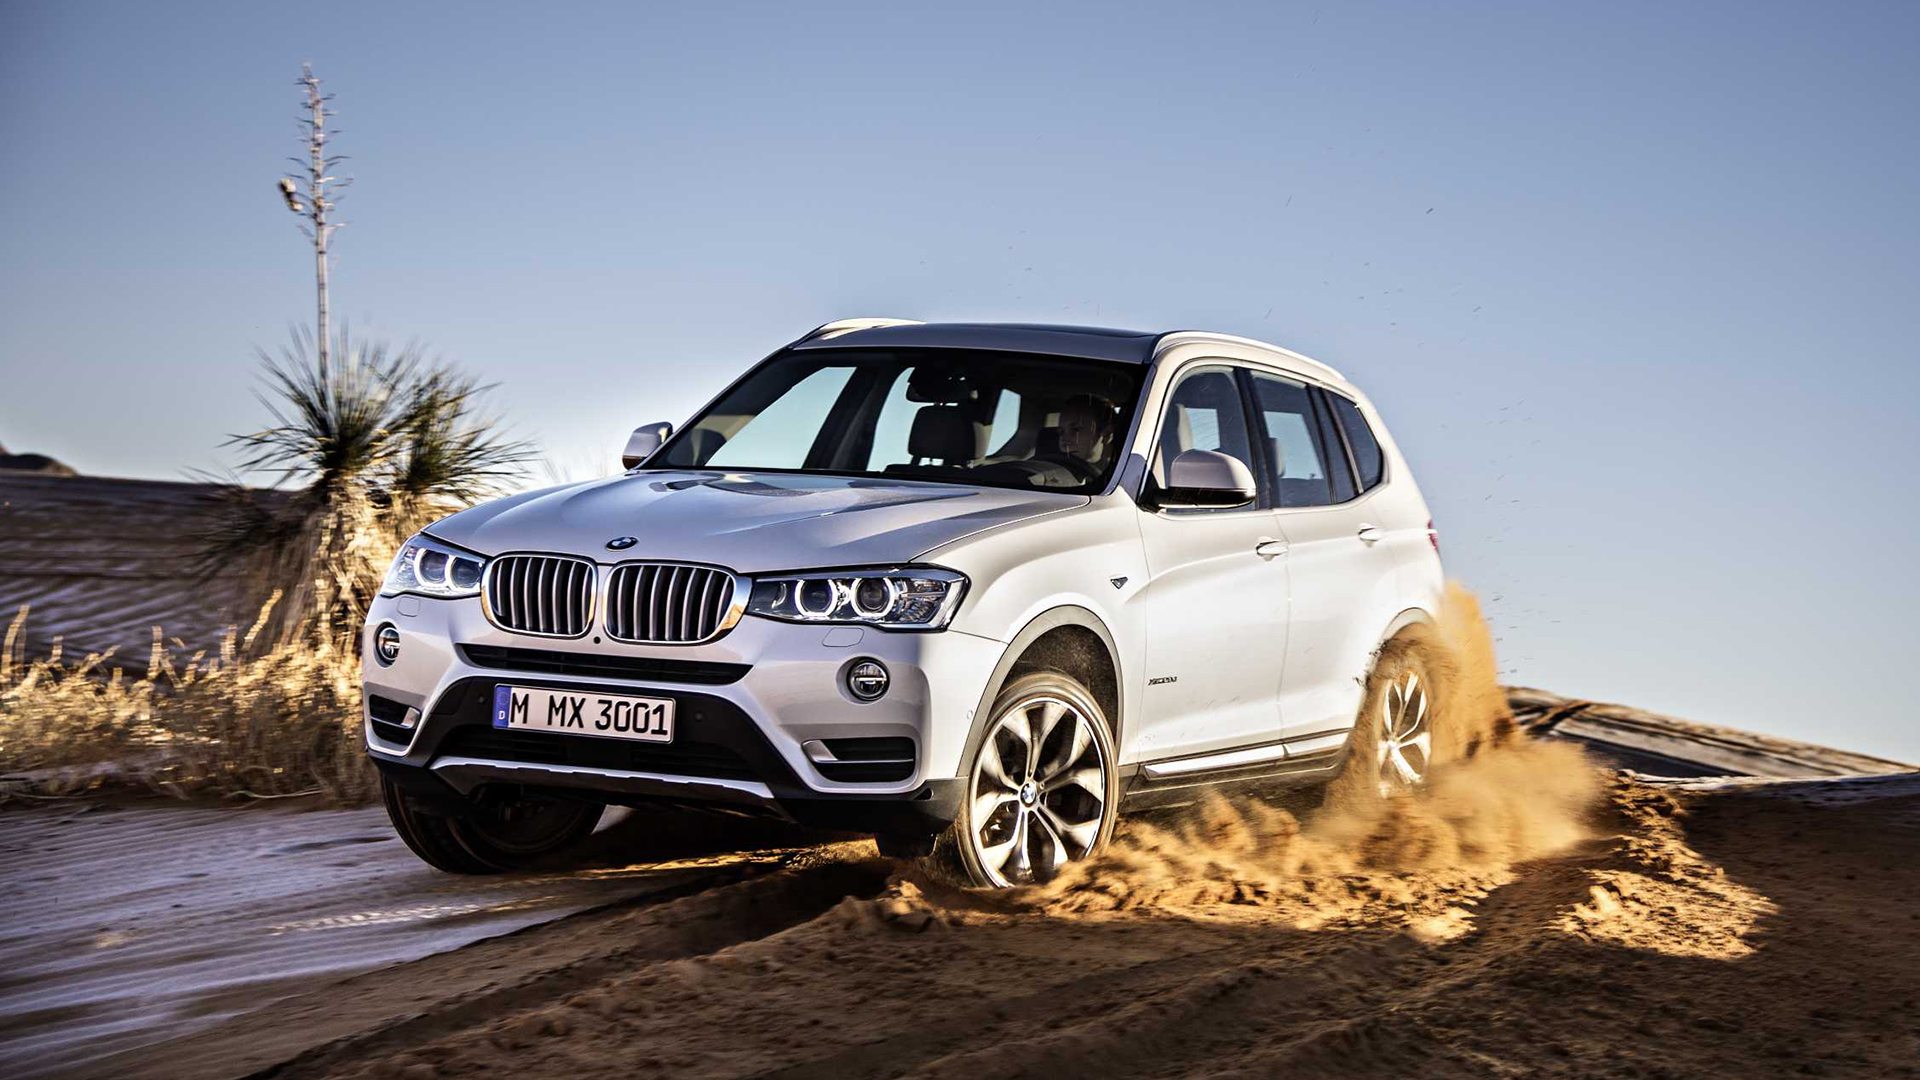 BMW x3 2014 xDrive 20d Expedition Exterior